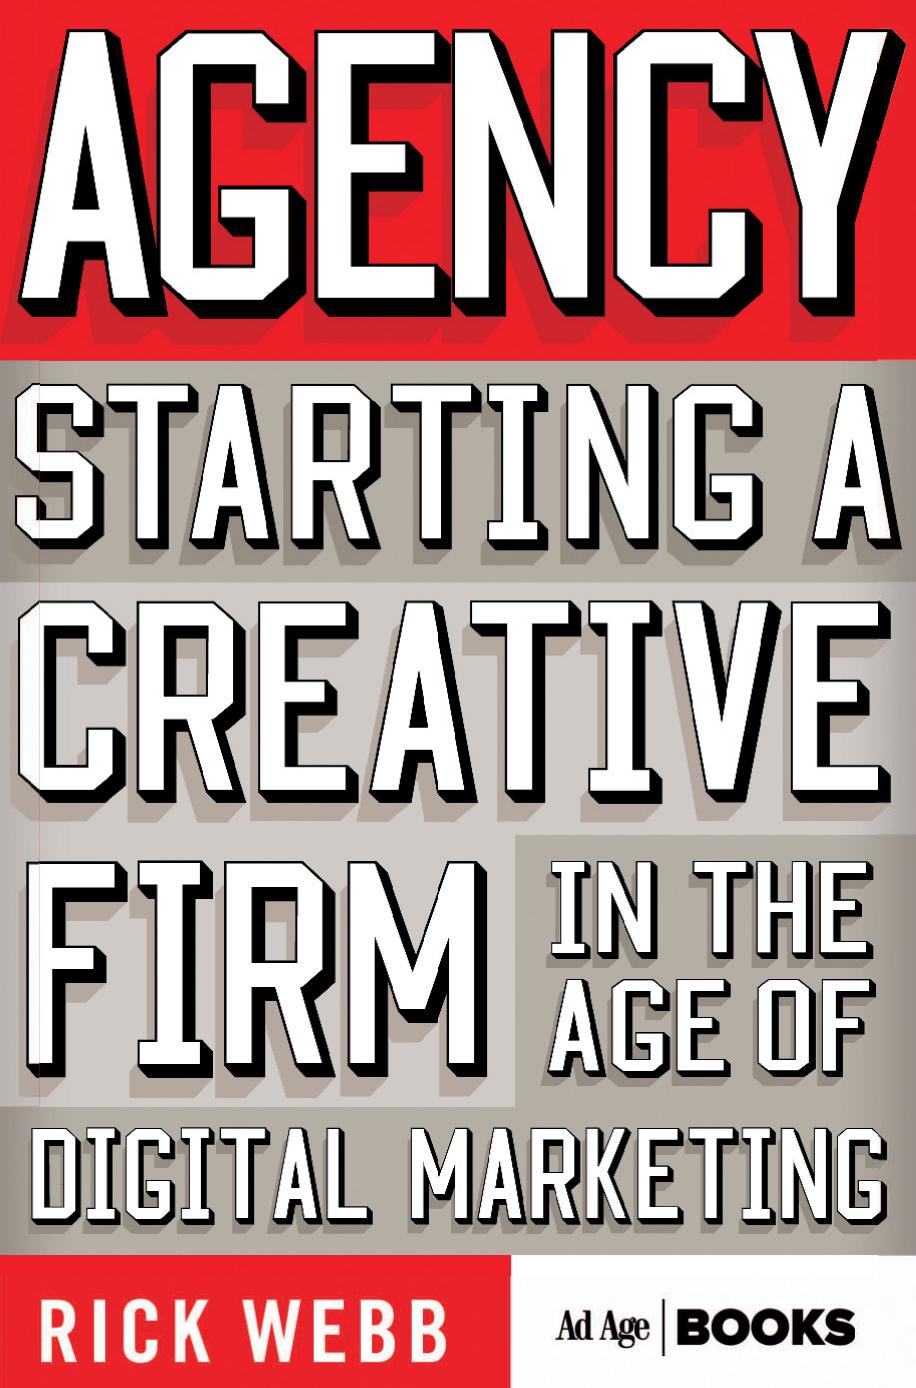 Agency Starting a Creative Firm in the Age of Digital Marketing by Unknown